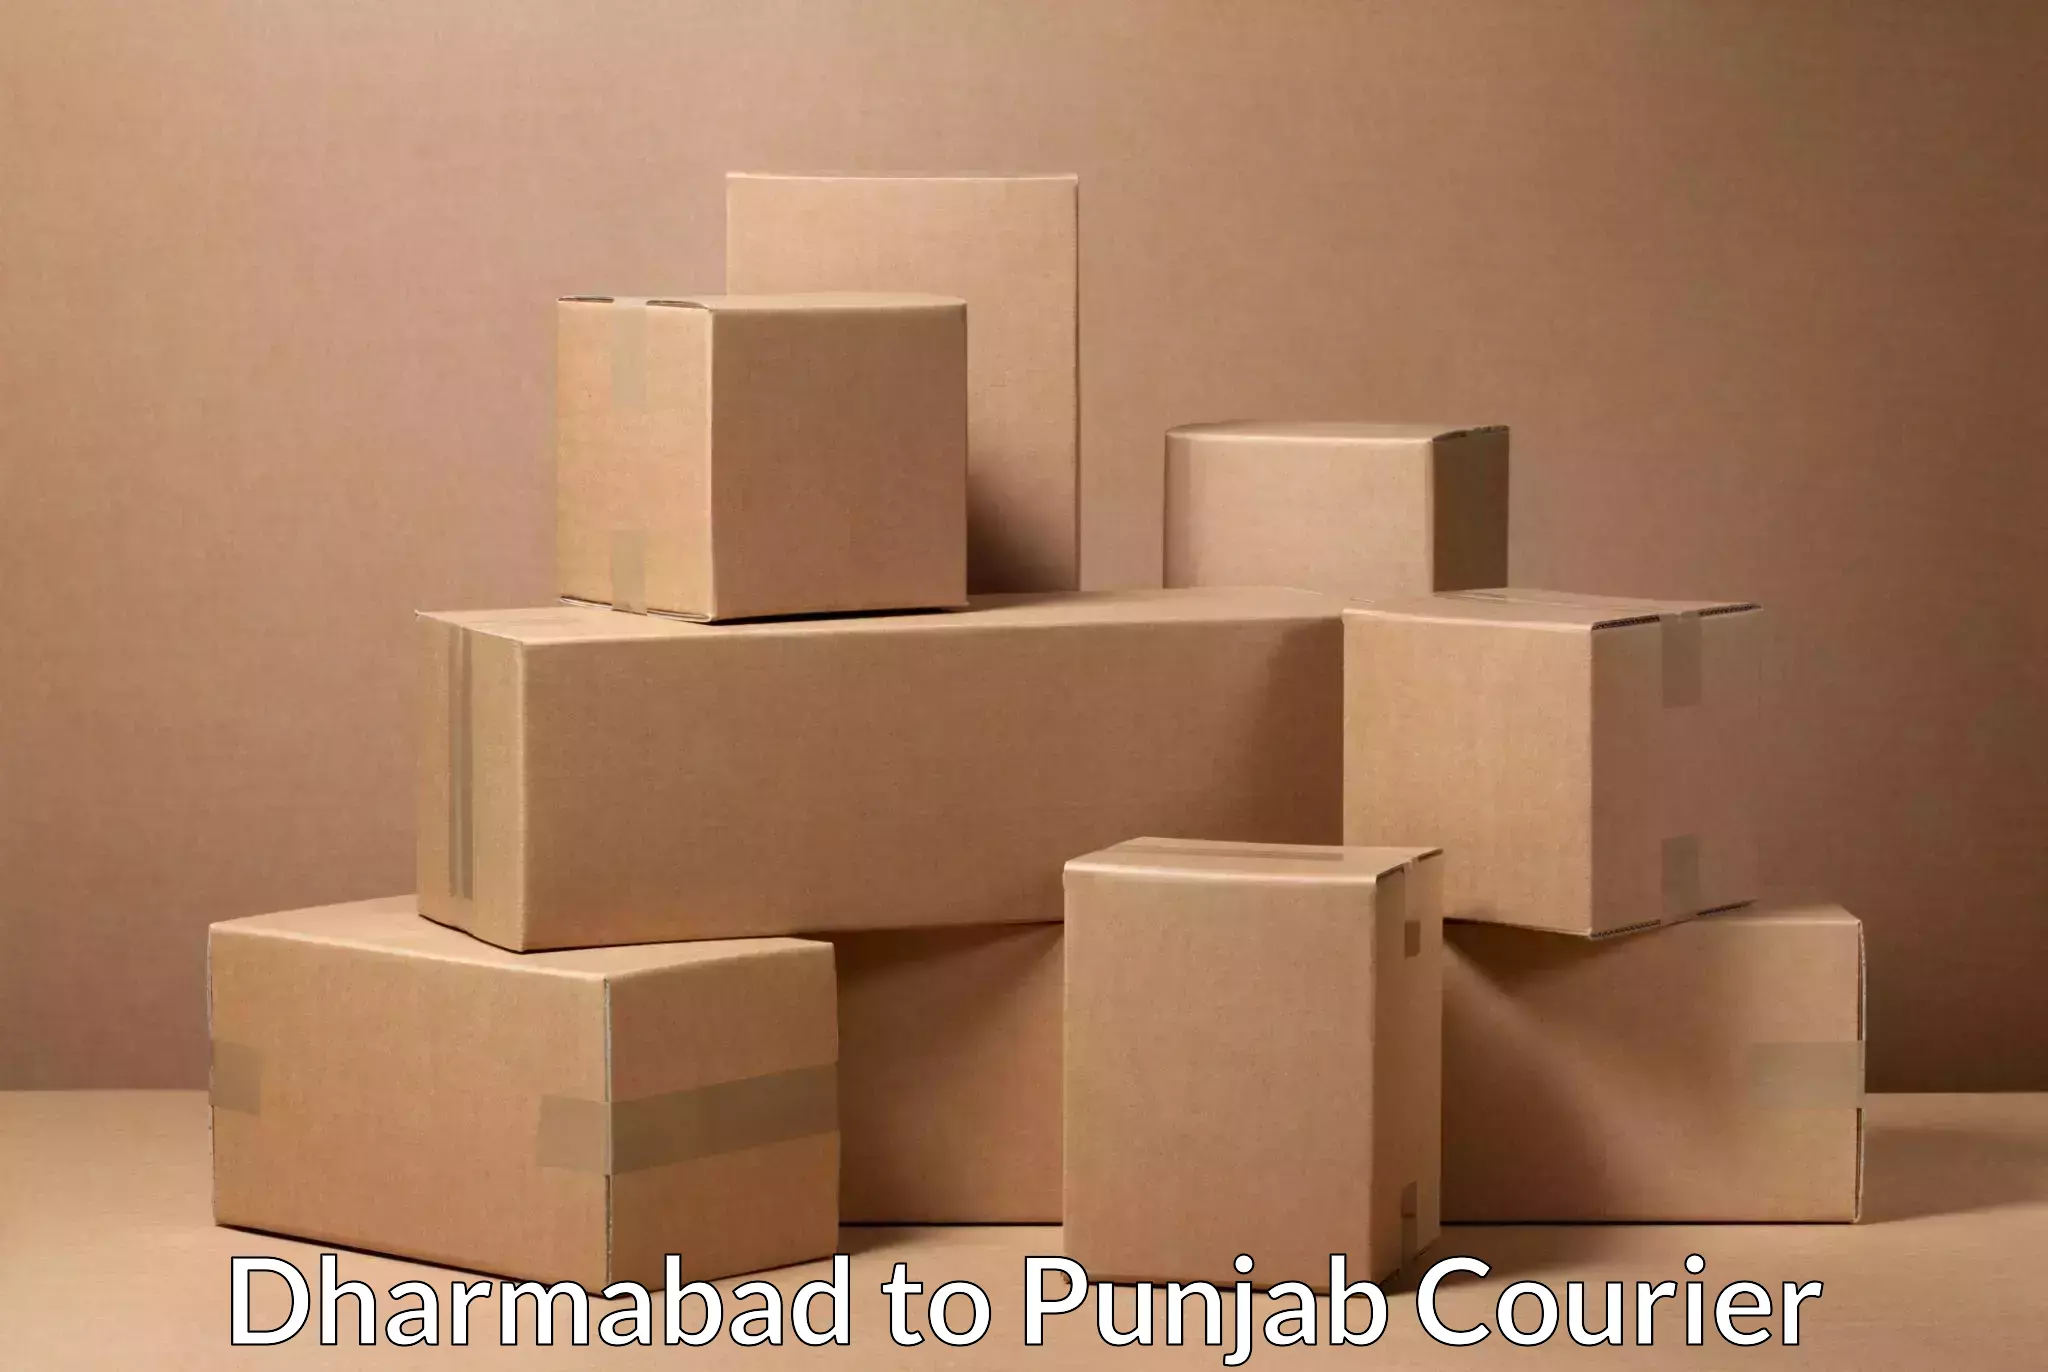 Full-service courier options Dharmabad to Ajnala